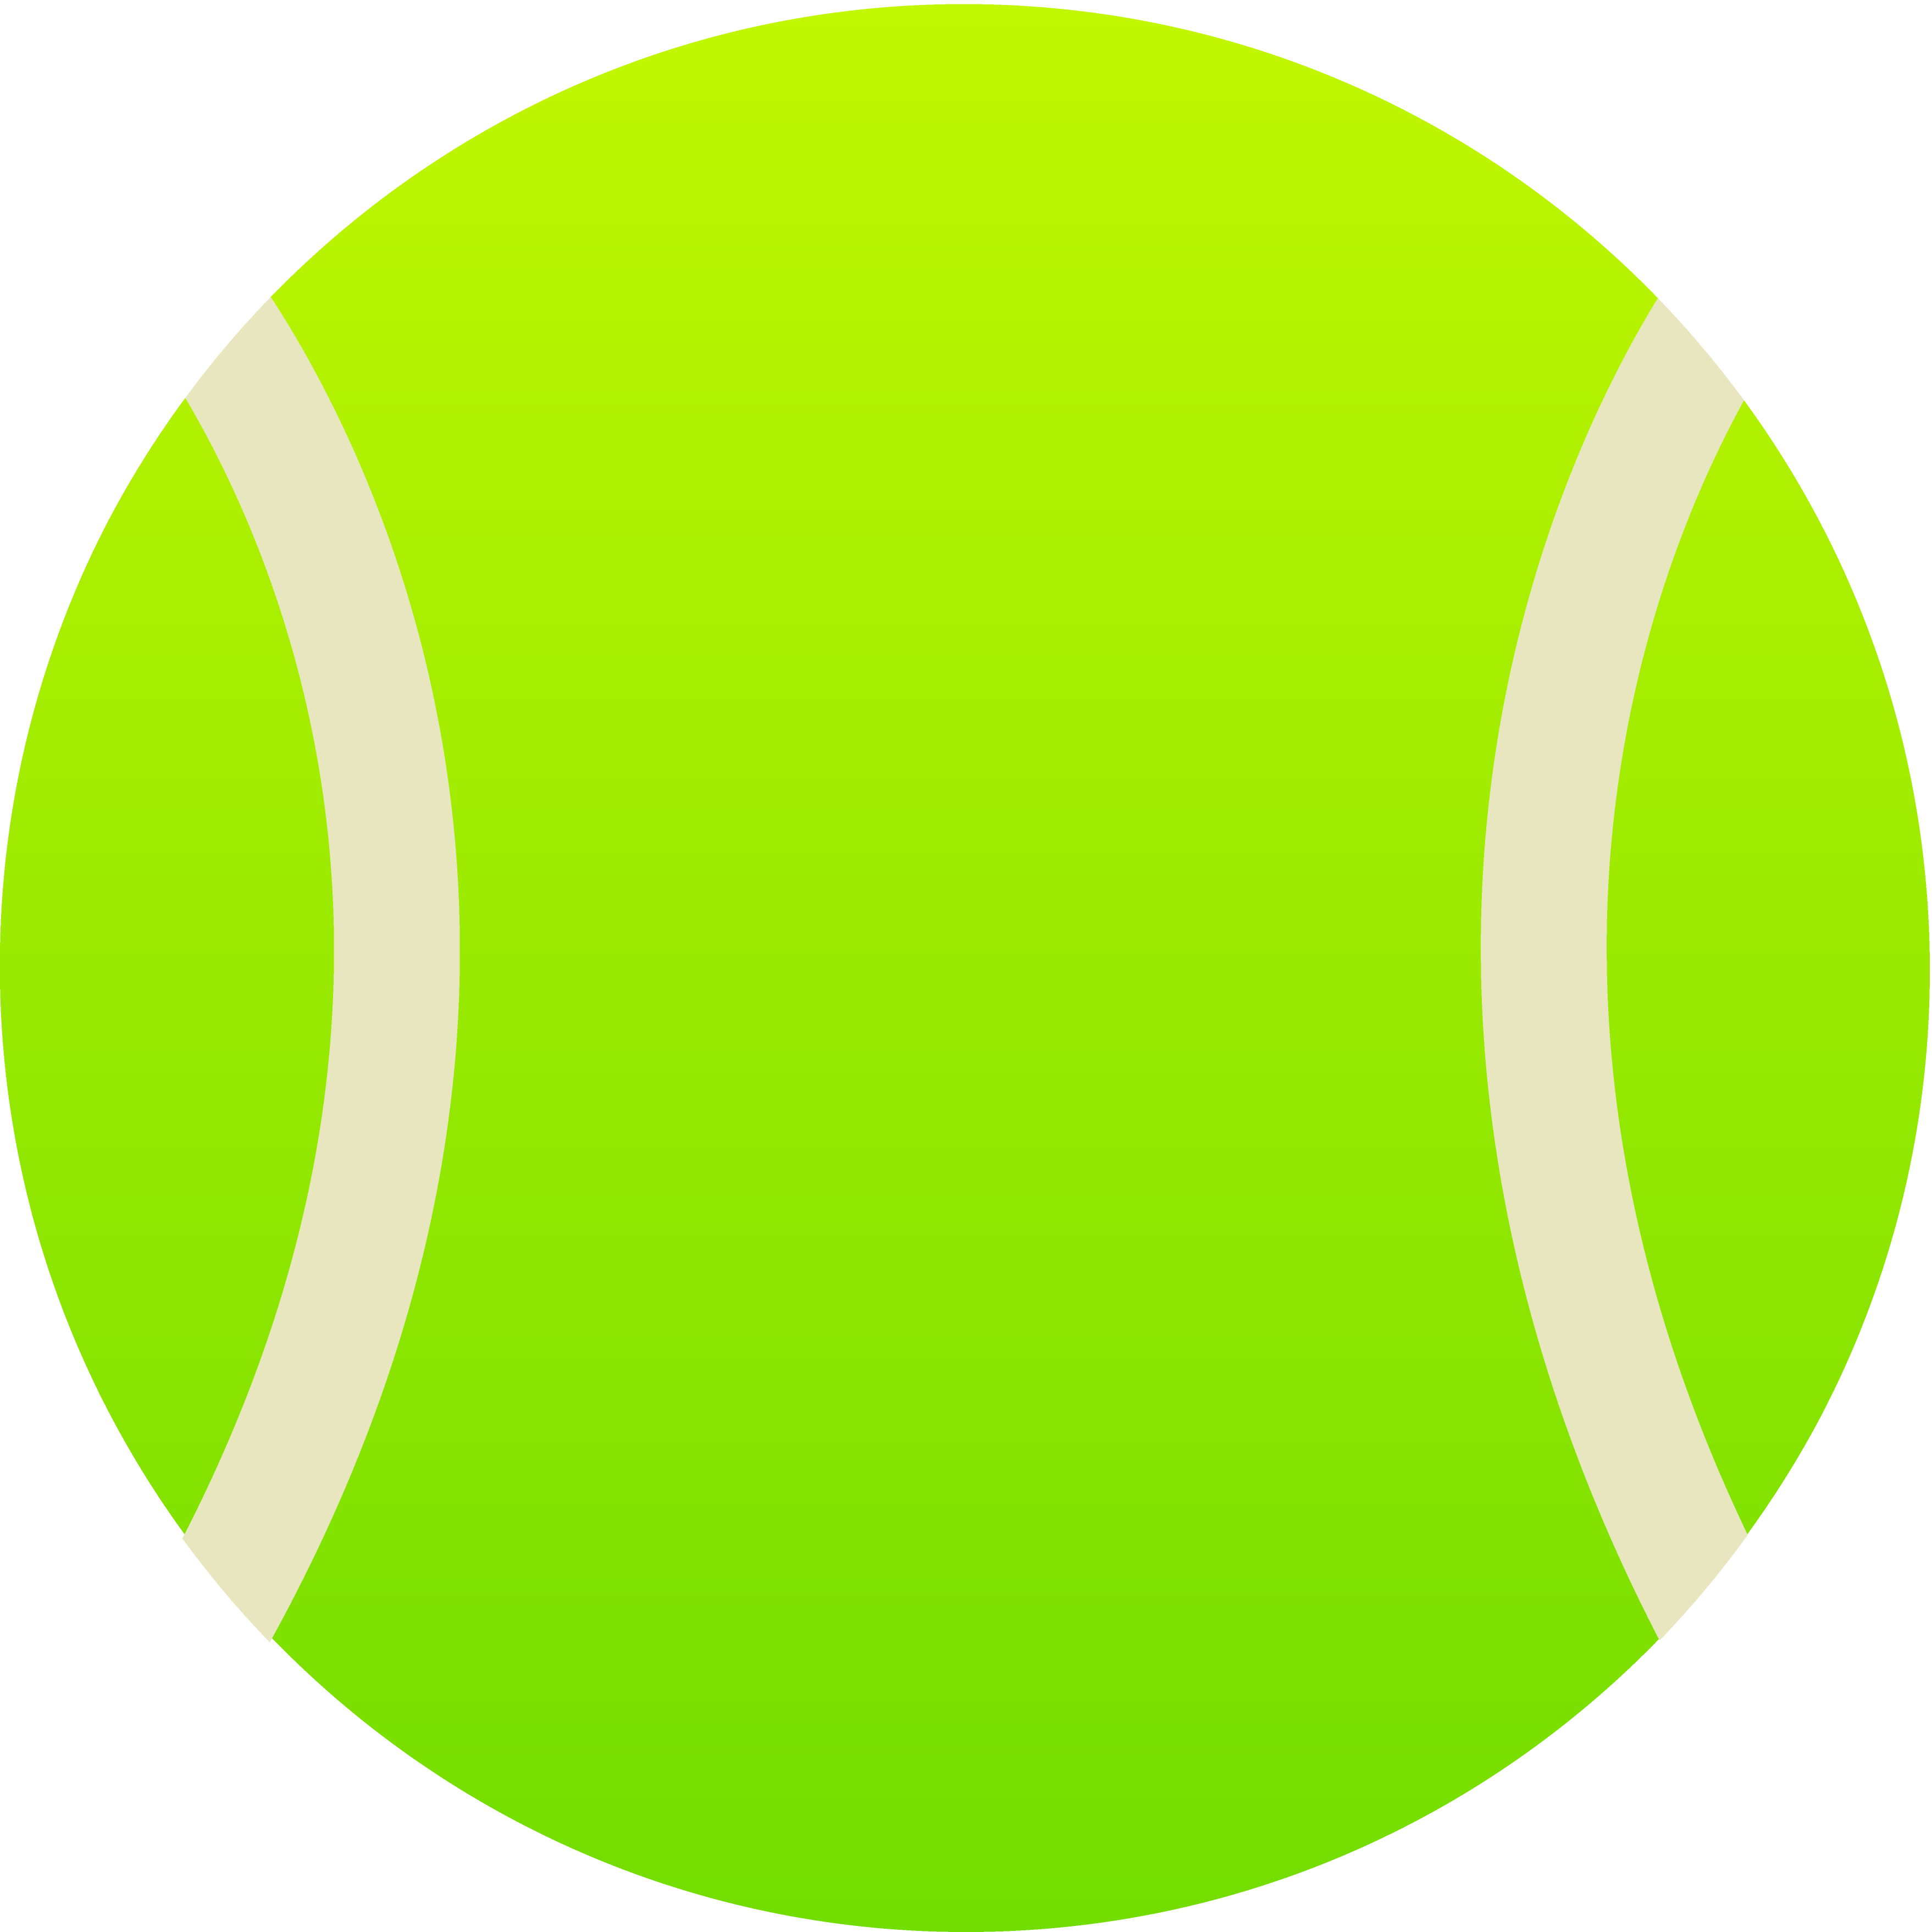 Free Tennis Ball Picture, Download Free Clip Art, Free Clip.